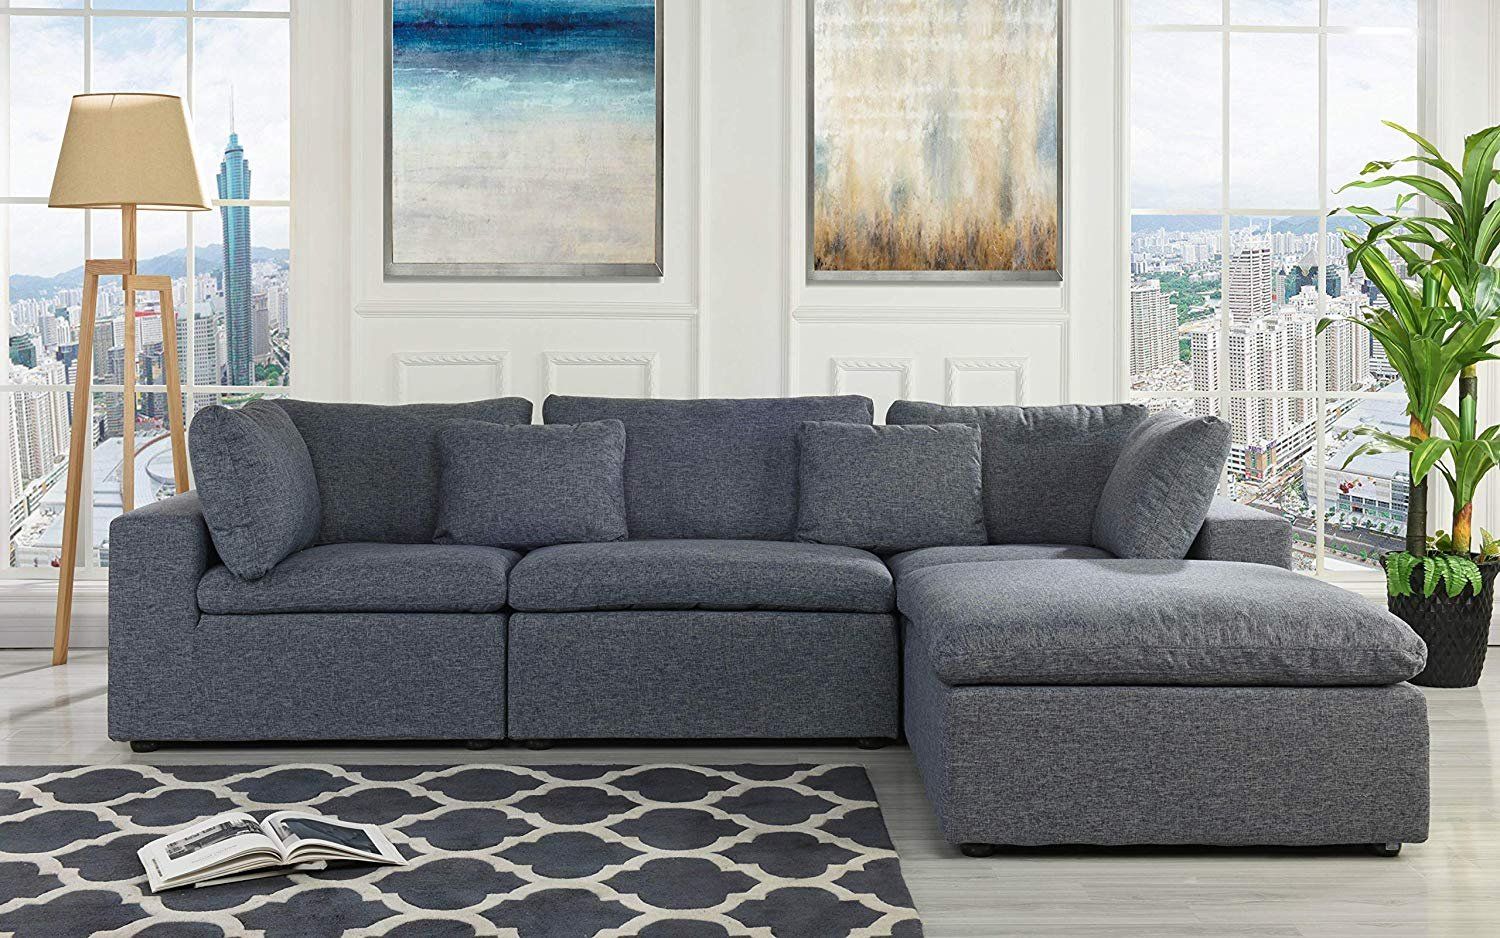 Classic Large Dark Grey Sectional Sofa, L Shape Fabric Couch With Wide Within Dark Gray Sectional Sofas (View 8 of 20)